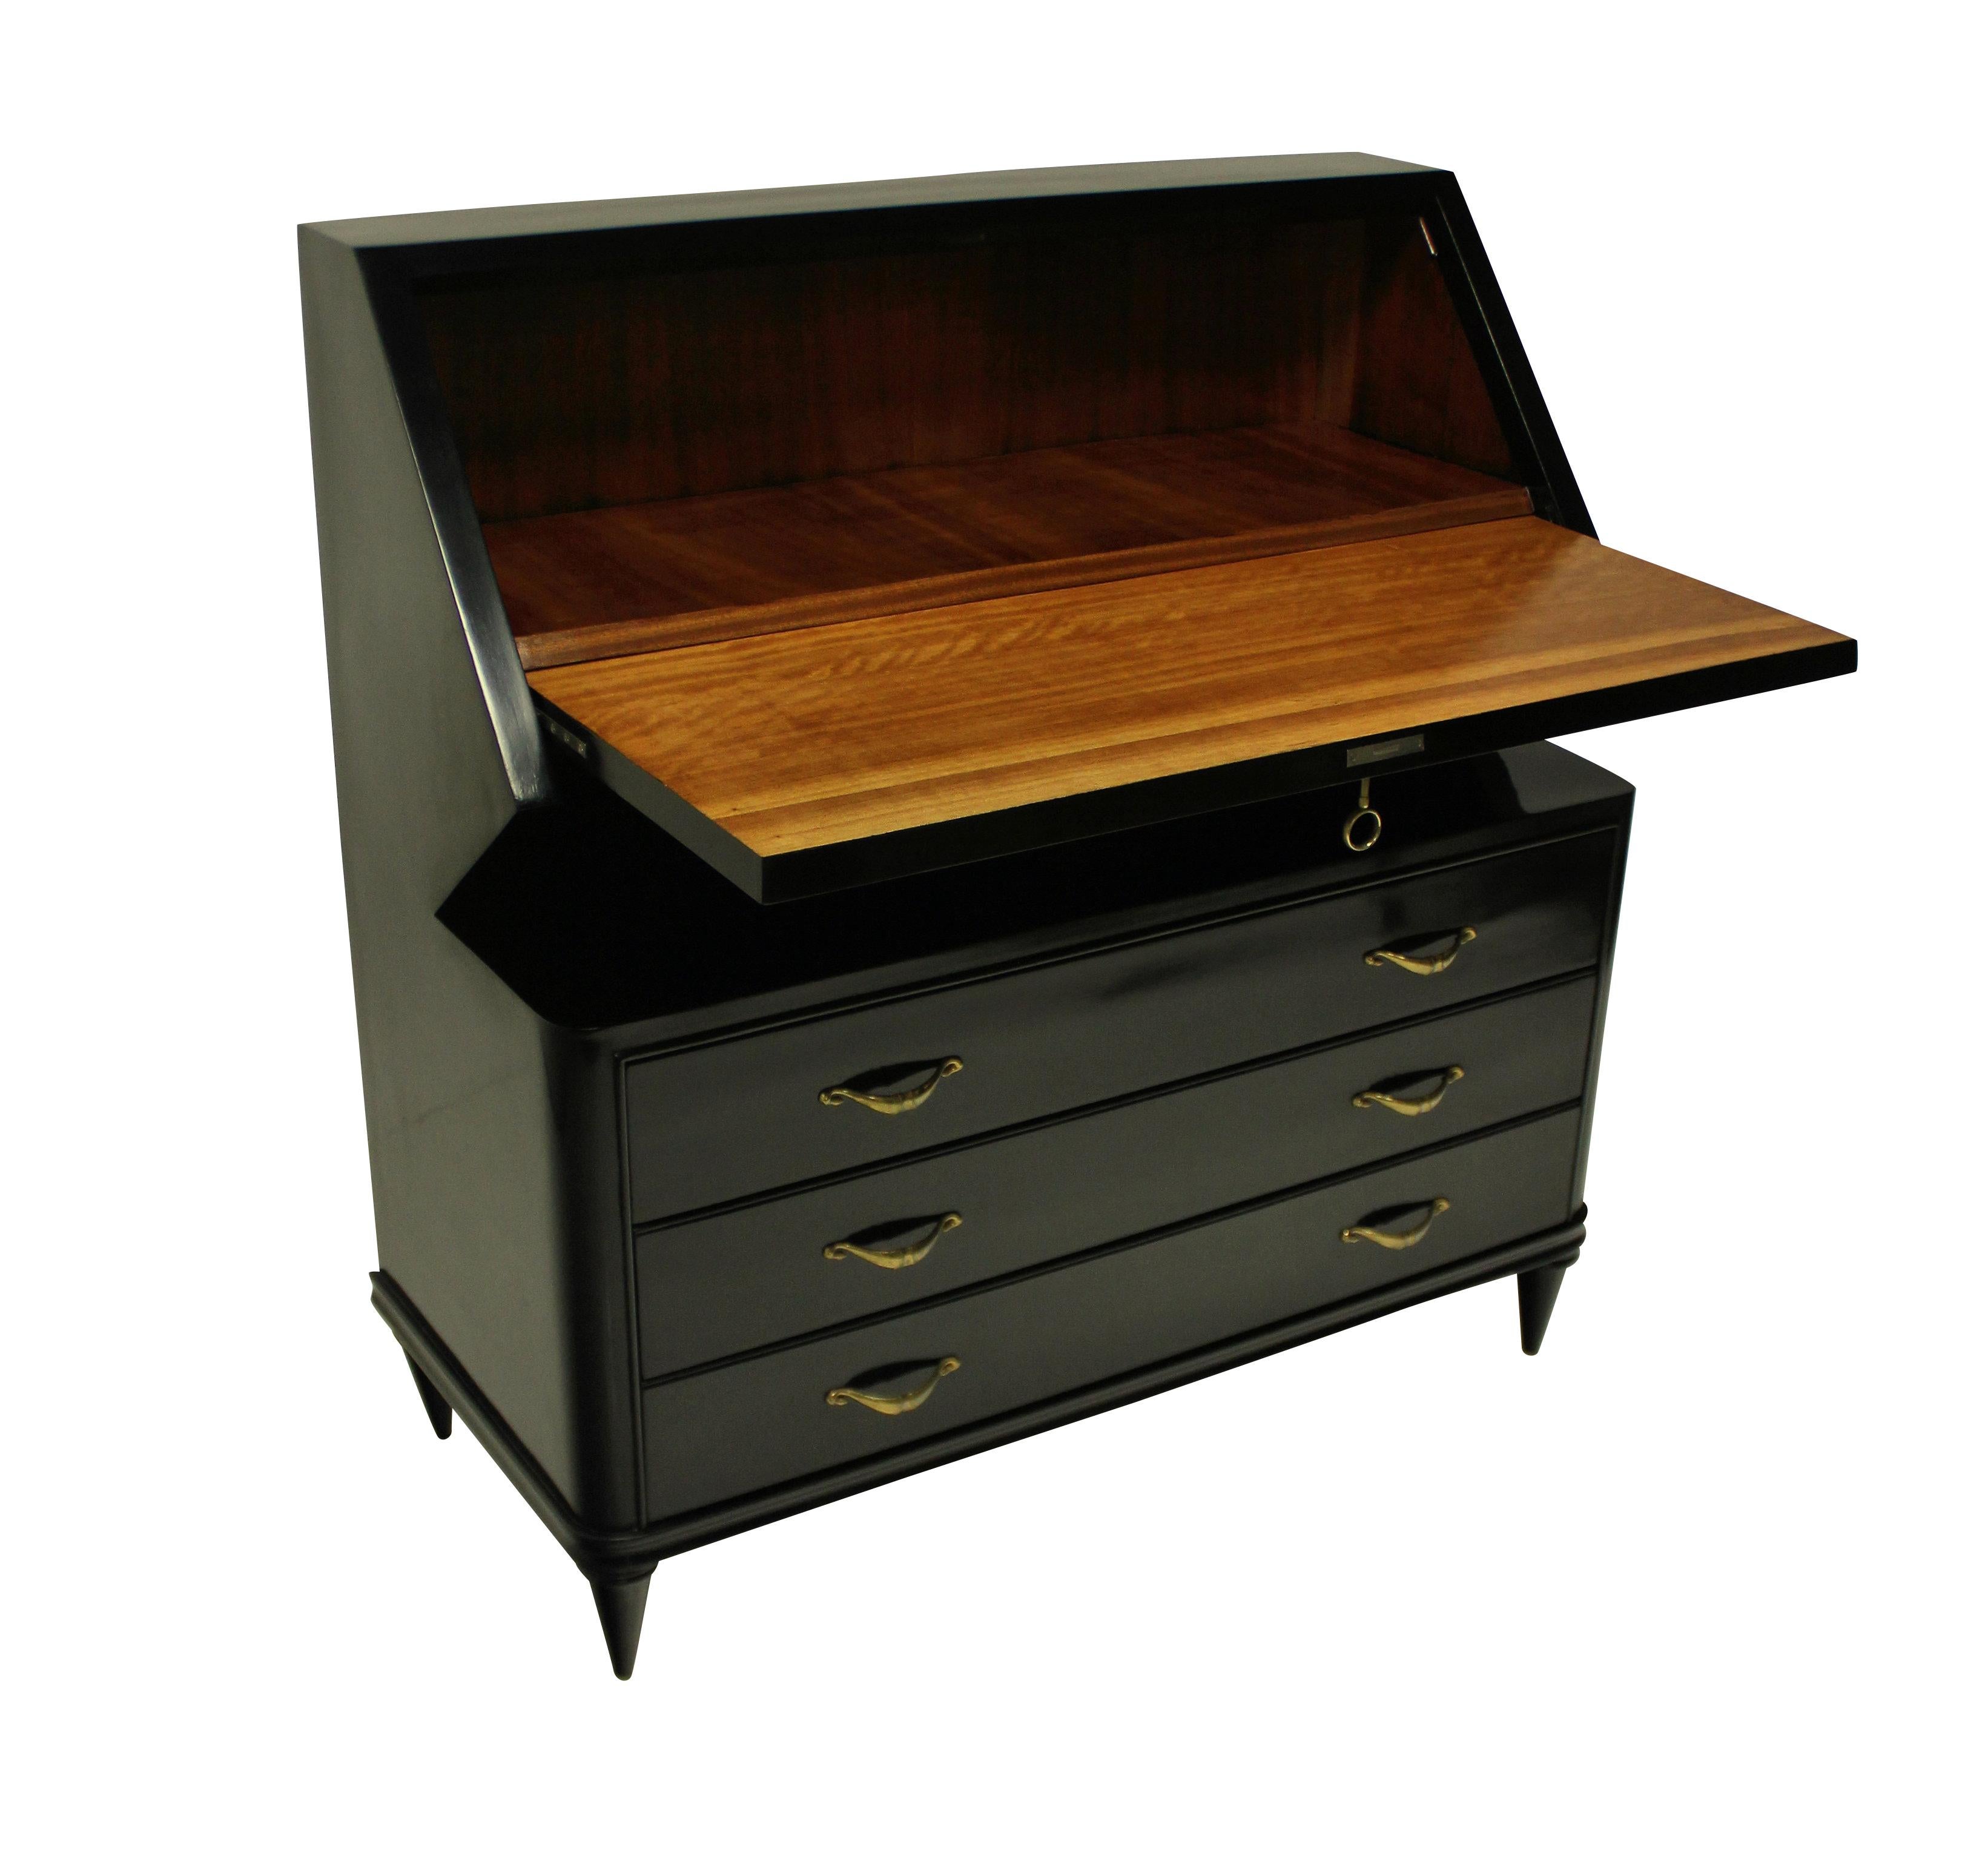 An elegant French midcentury ebonised bureau, with three drawers and a fall front desk. With swag shaped brass handles, a decorative key and star motif to the door.